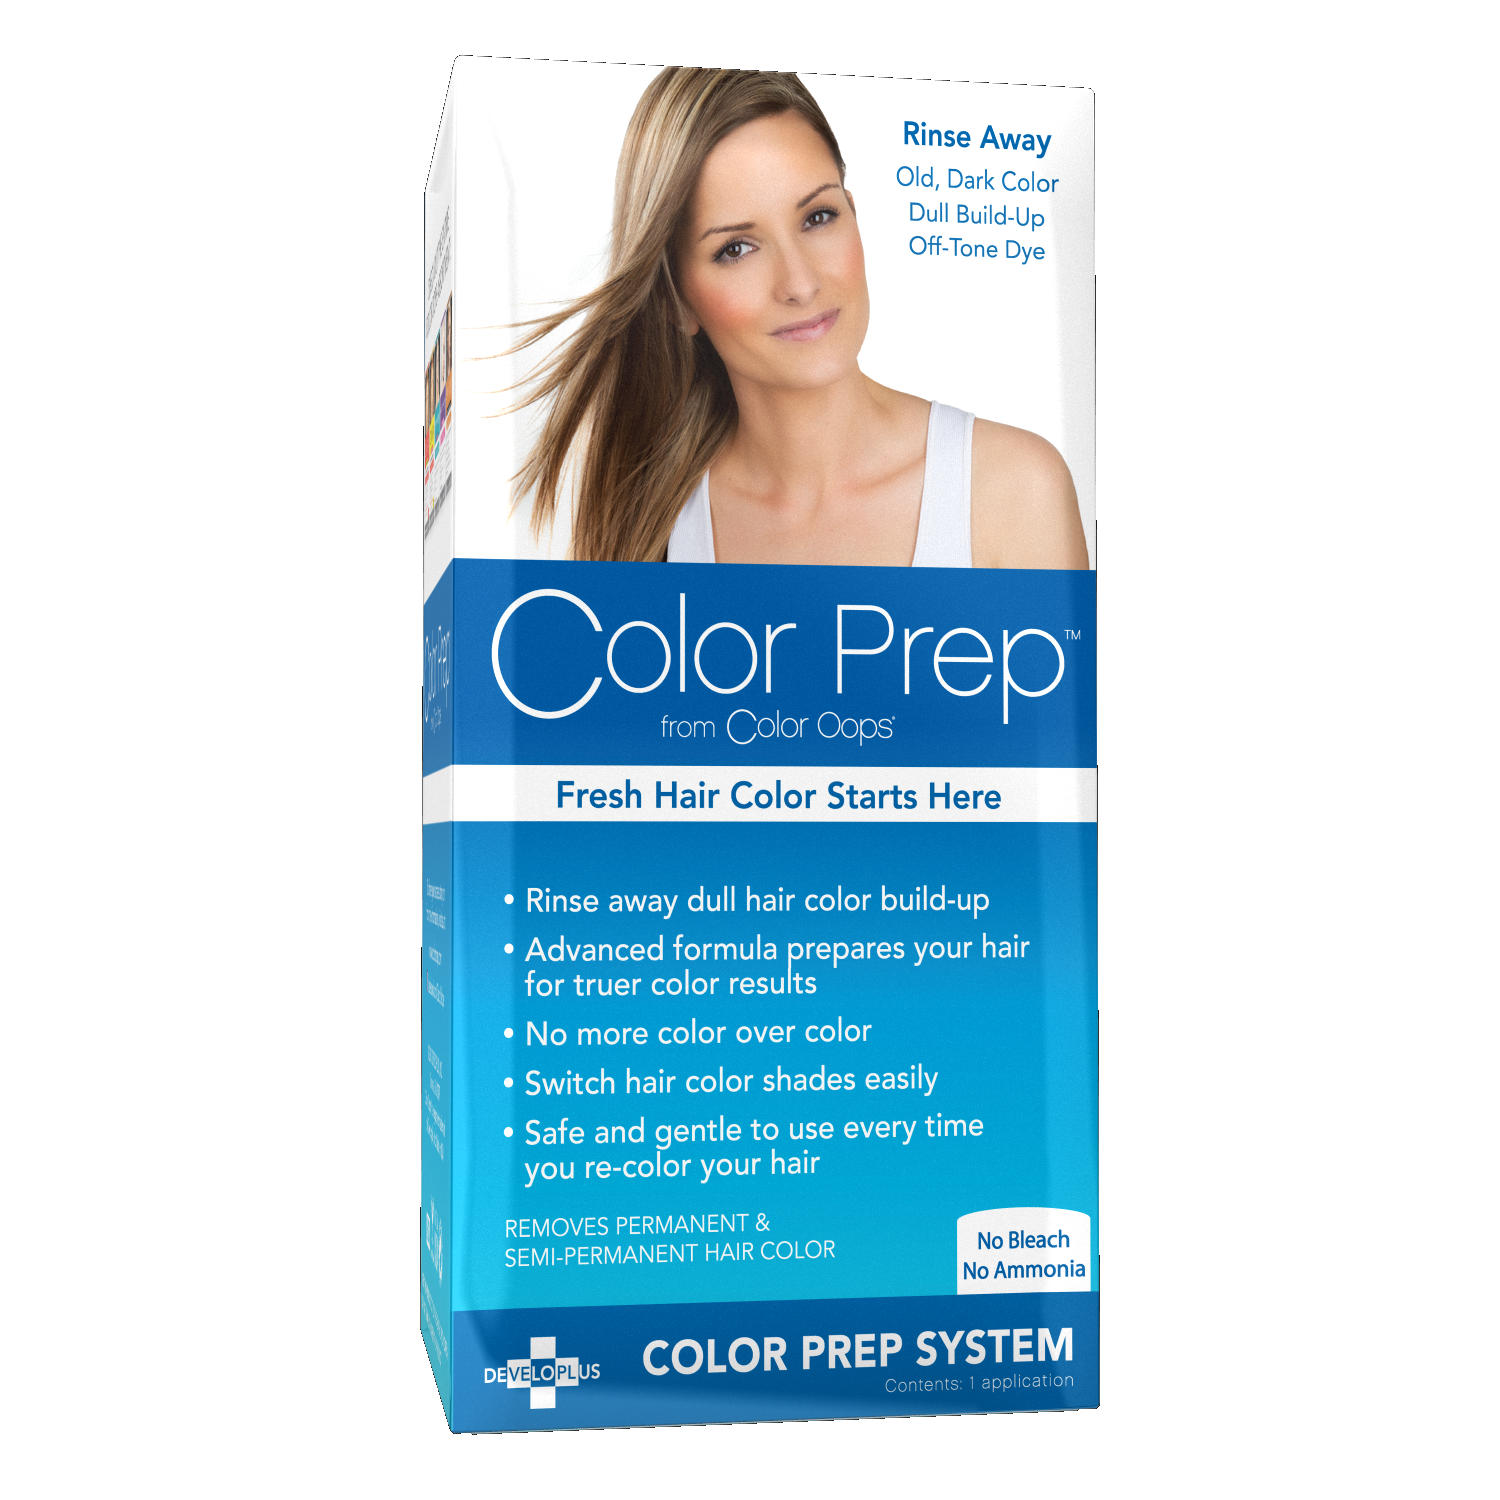 Color Oops - Decided to try and make my hair maintenance free. I read  about the Oops Color Remover most reviews were goodIt did wonders! I  re-dyed with an ashy blonde the